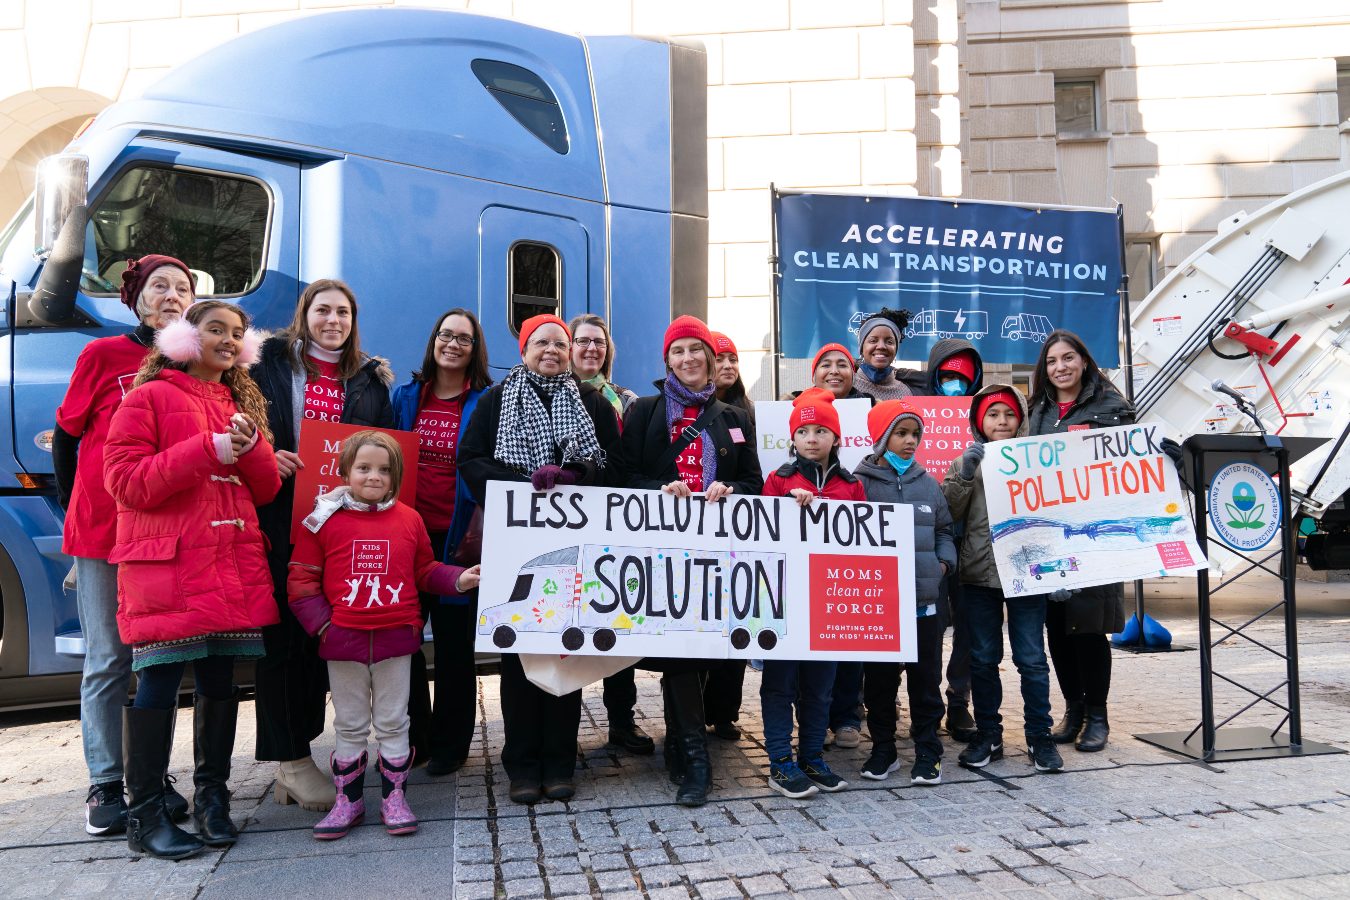 A group of women and children dressed for cold weather hold signs against truck pollution in front of a stationary blue-colored semi truck on December 20, 2022.